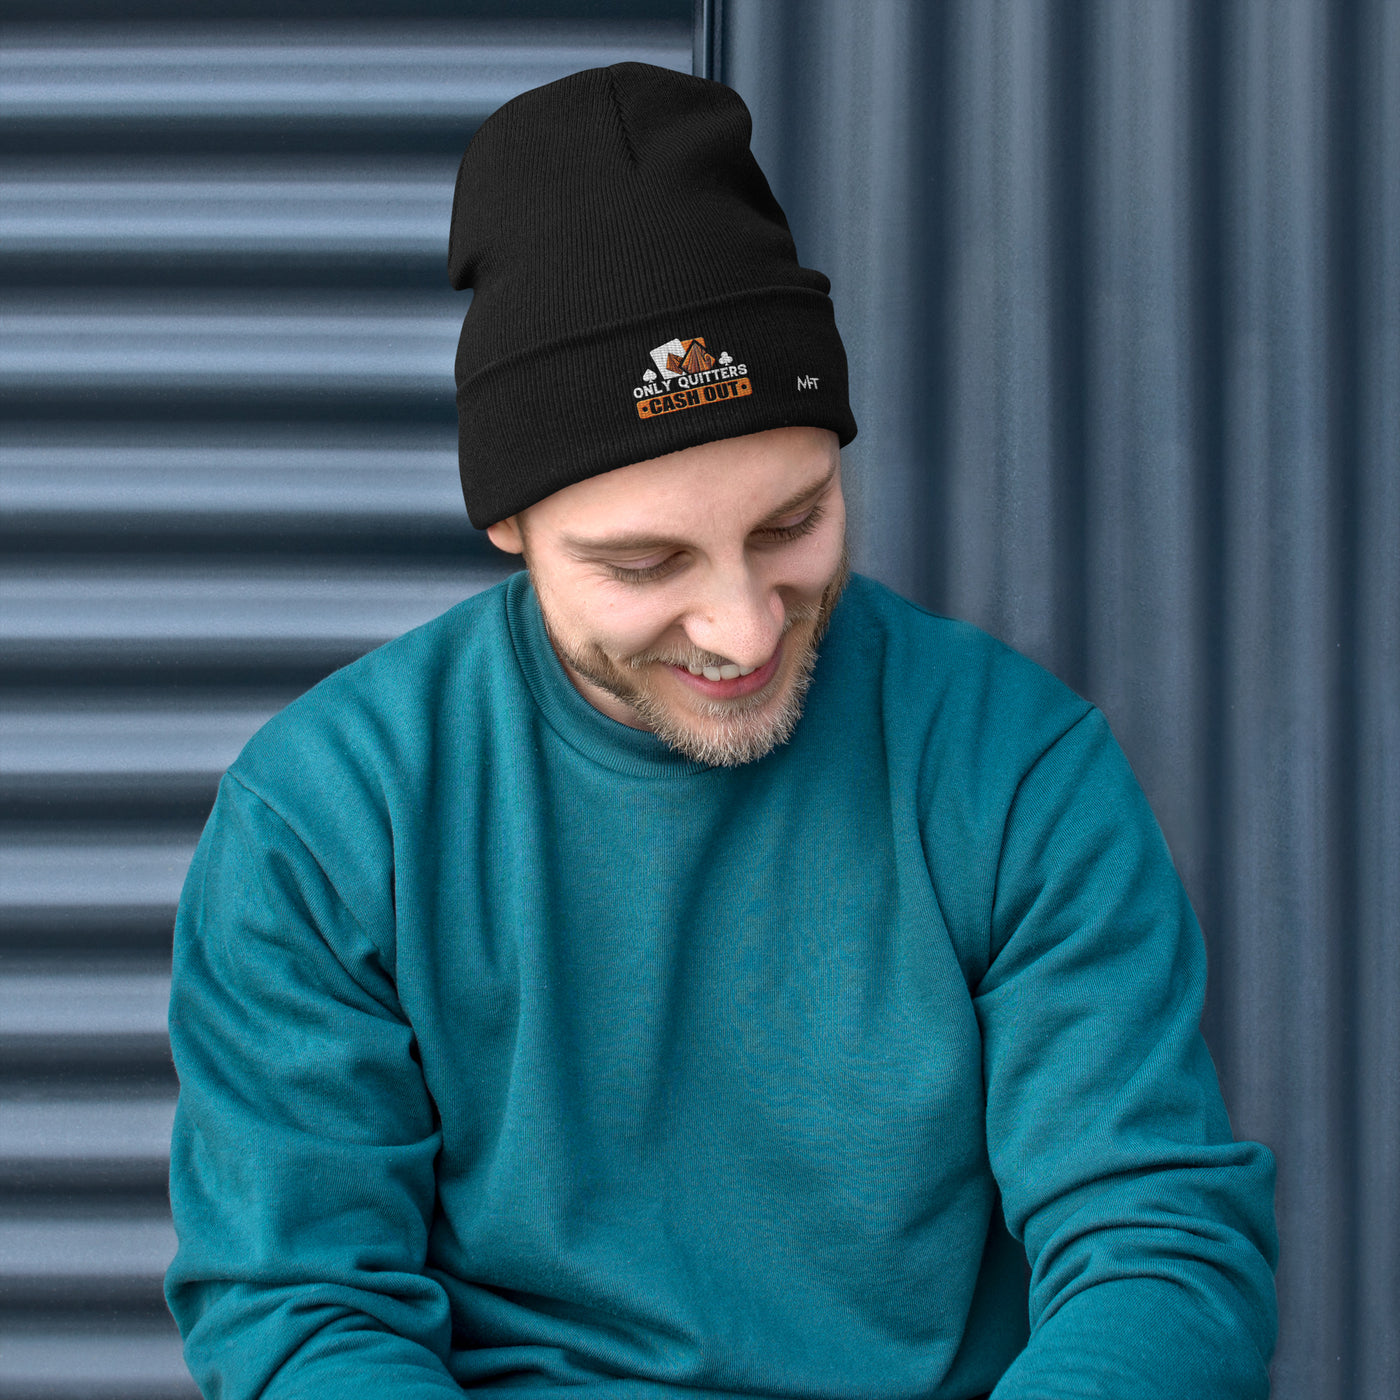 Only Quitters Cash Out - Embroidered Beanie